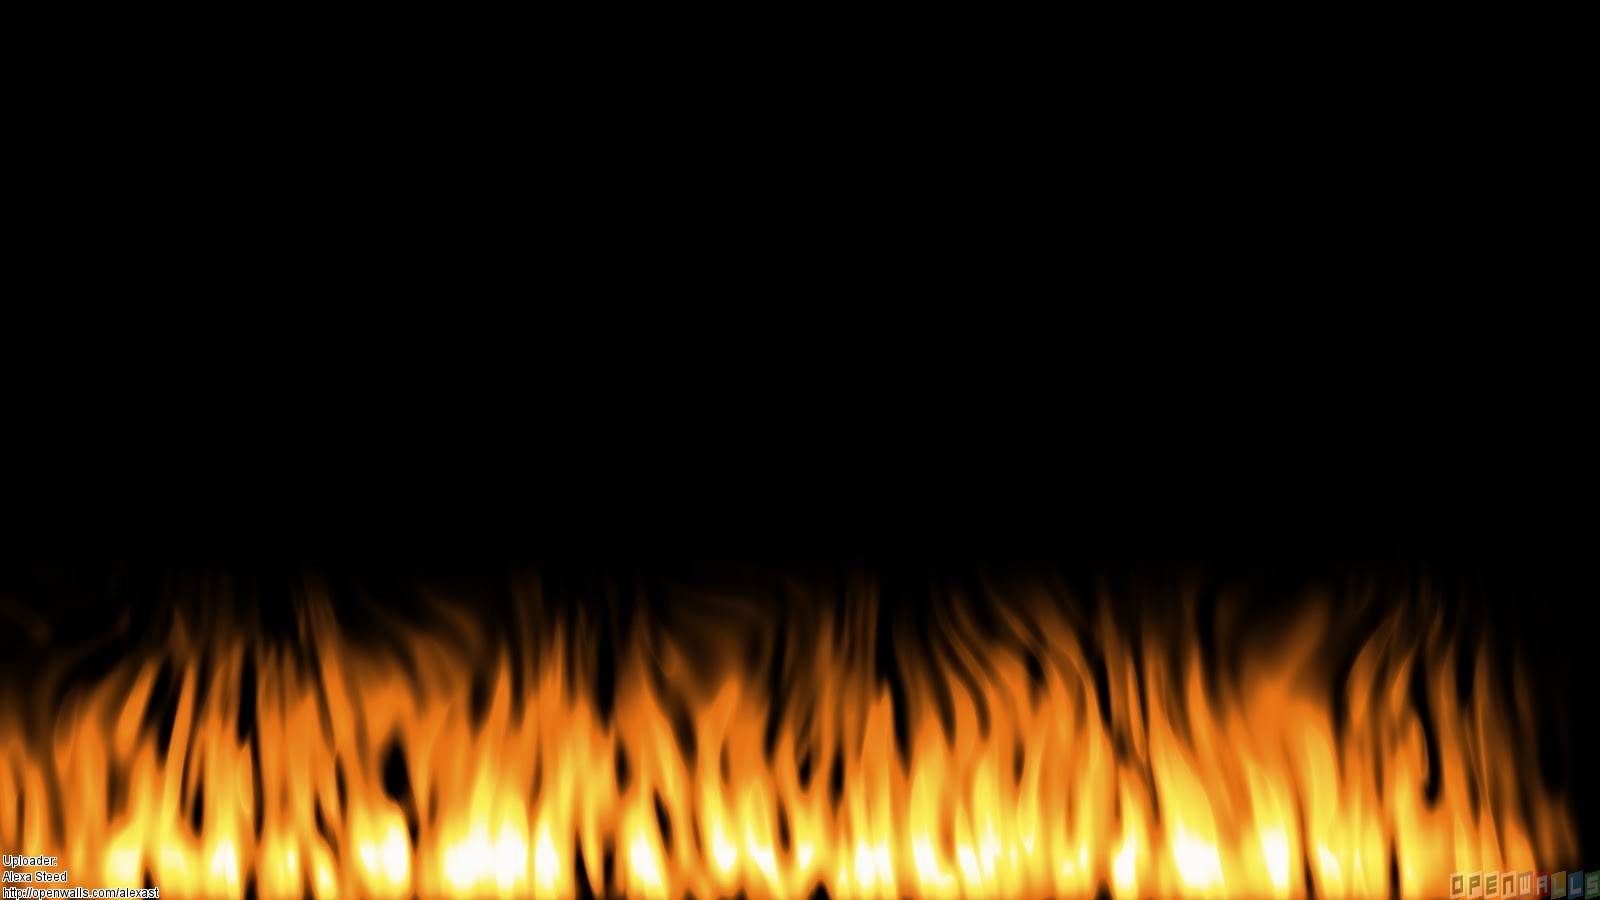 Flames on the black background wallpaper 6830   Open Walls